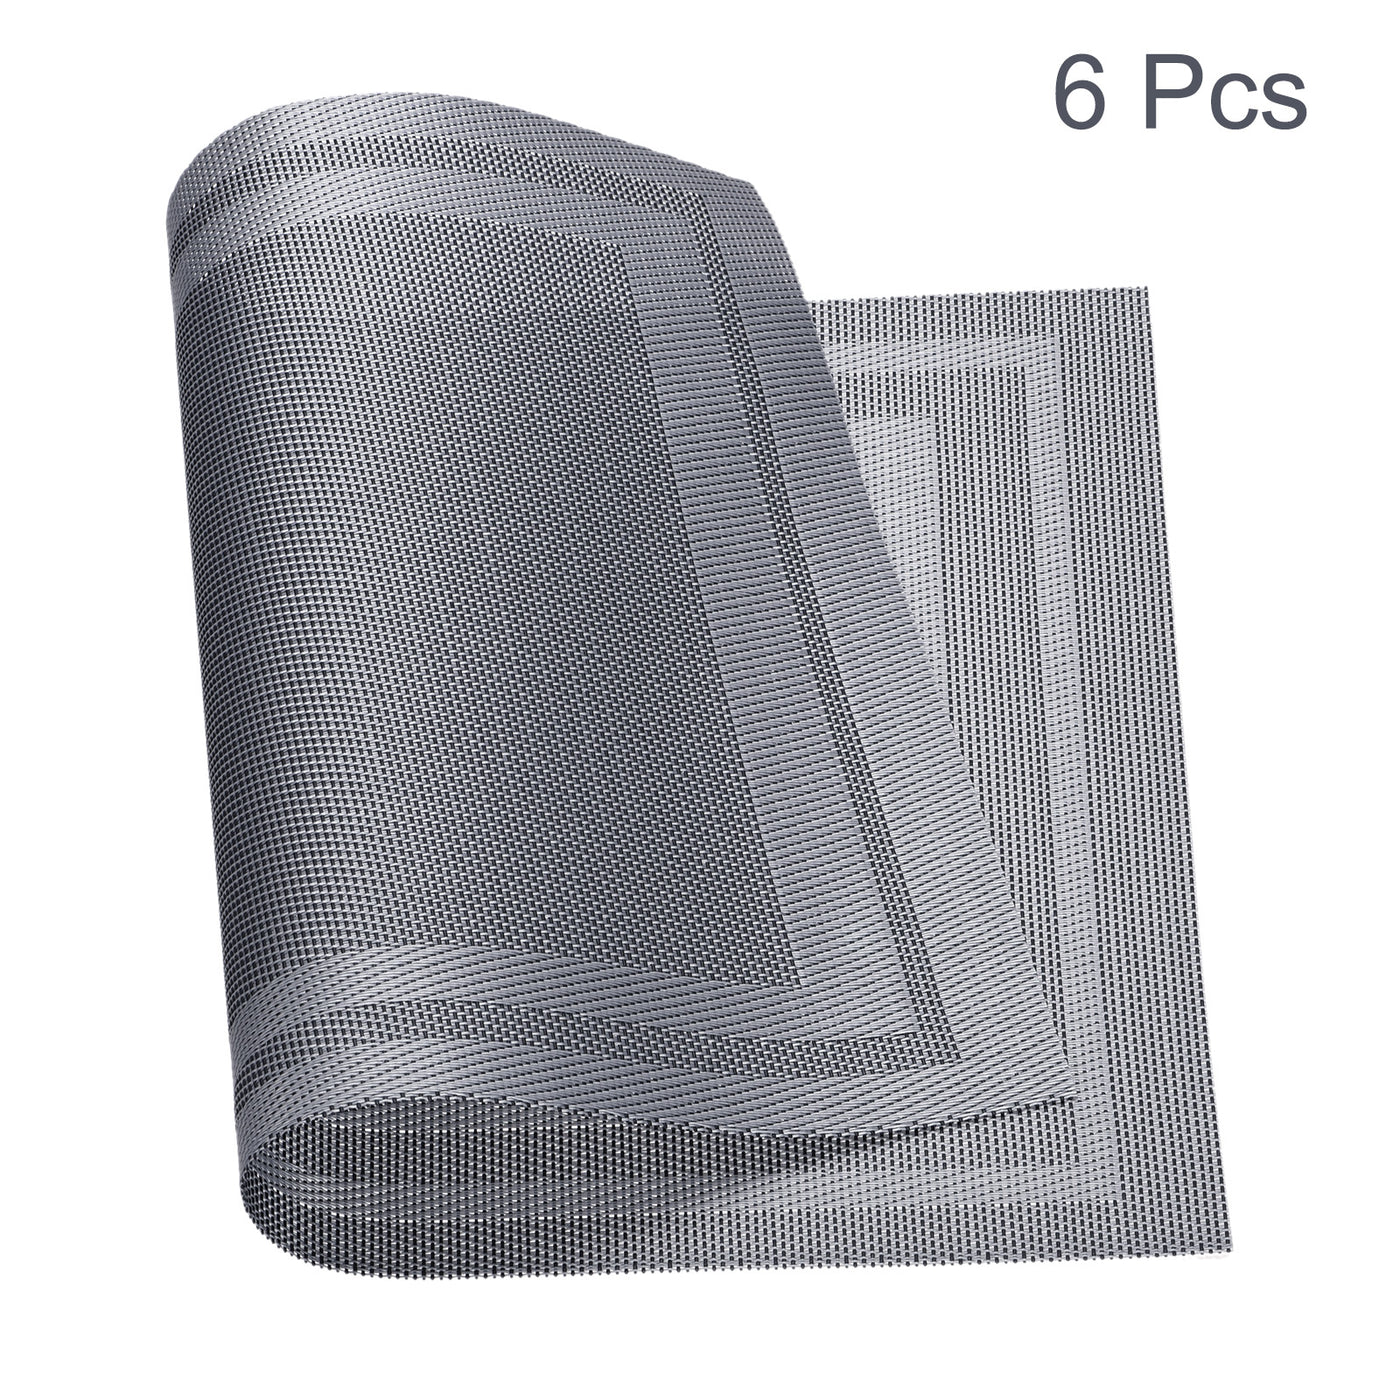 uxcell Uxcell Place Mats 450x300mm 6pcs PVC Table Washable Woven Placemat, Gray